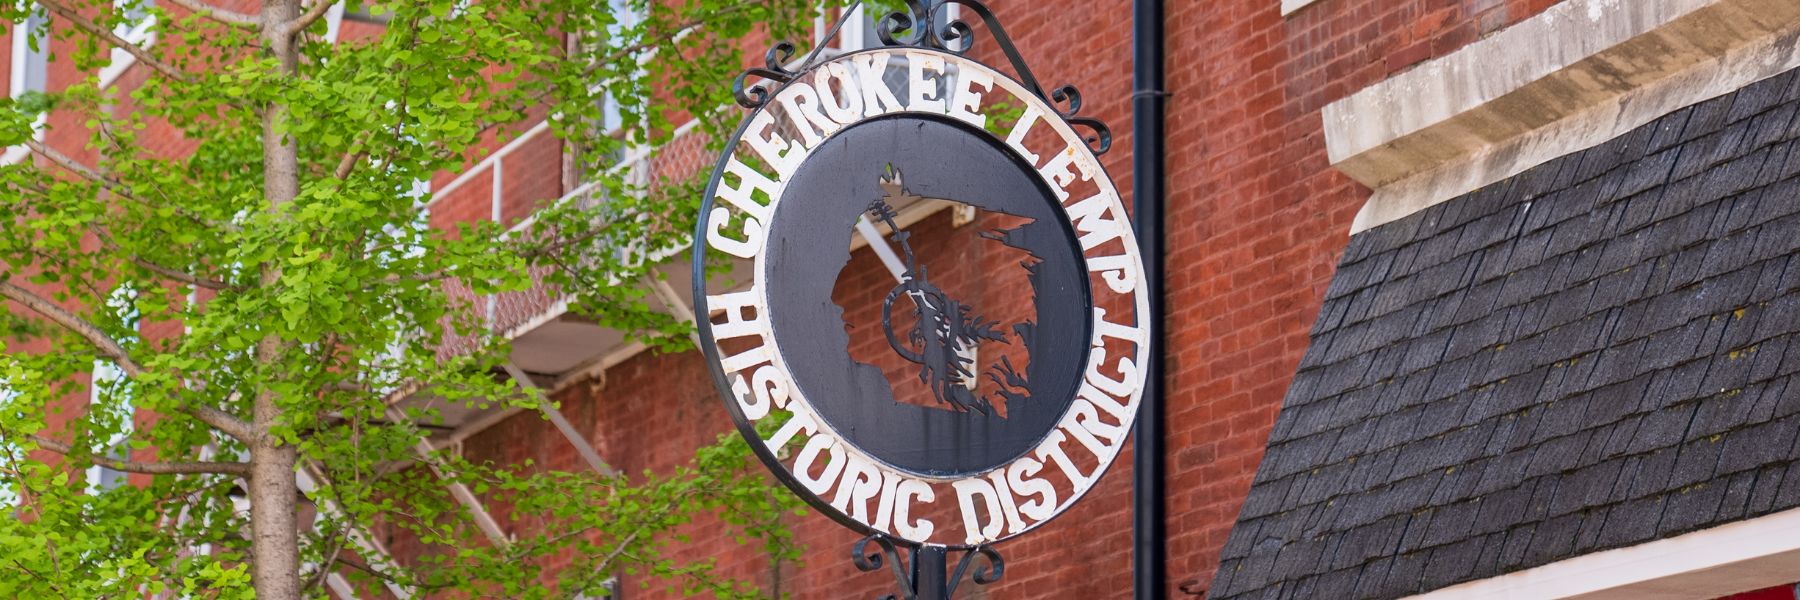 Cherokee Antique Row is one of the best places to shop in St. Louis.